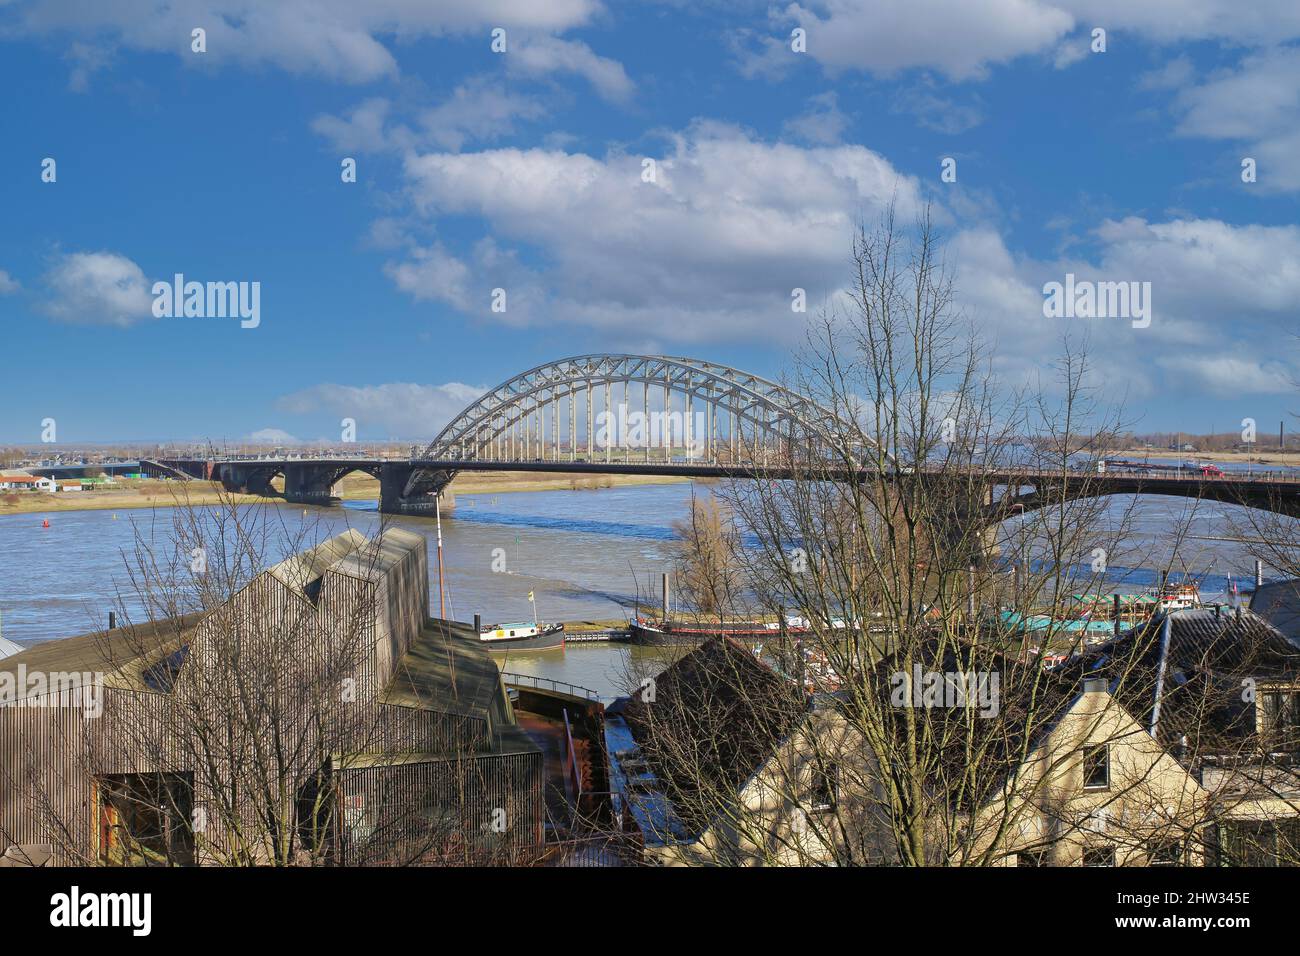 Nijmegen (Waalbrug), Netherlands - February 27. 2022: View fom hill over river waal on steel arch bridge with two pylons against blue winter sky Stock Photo